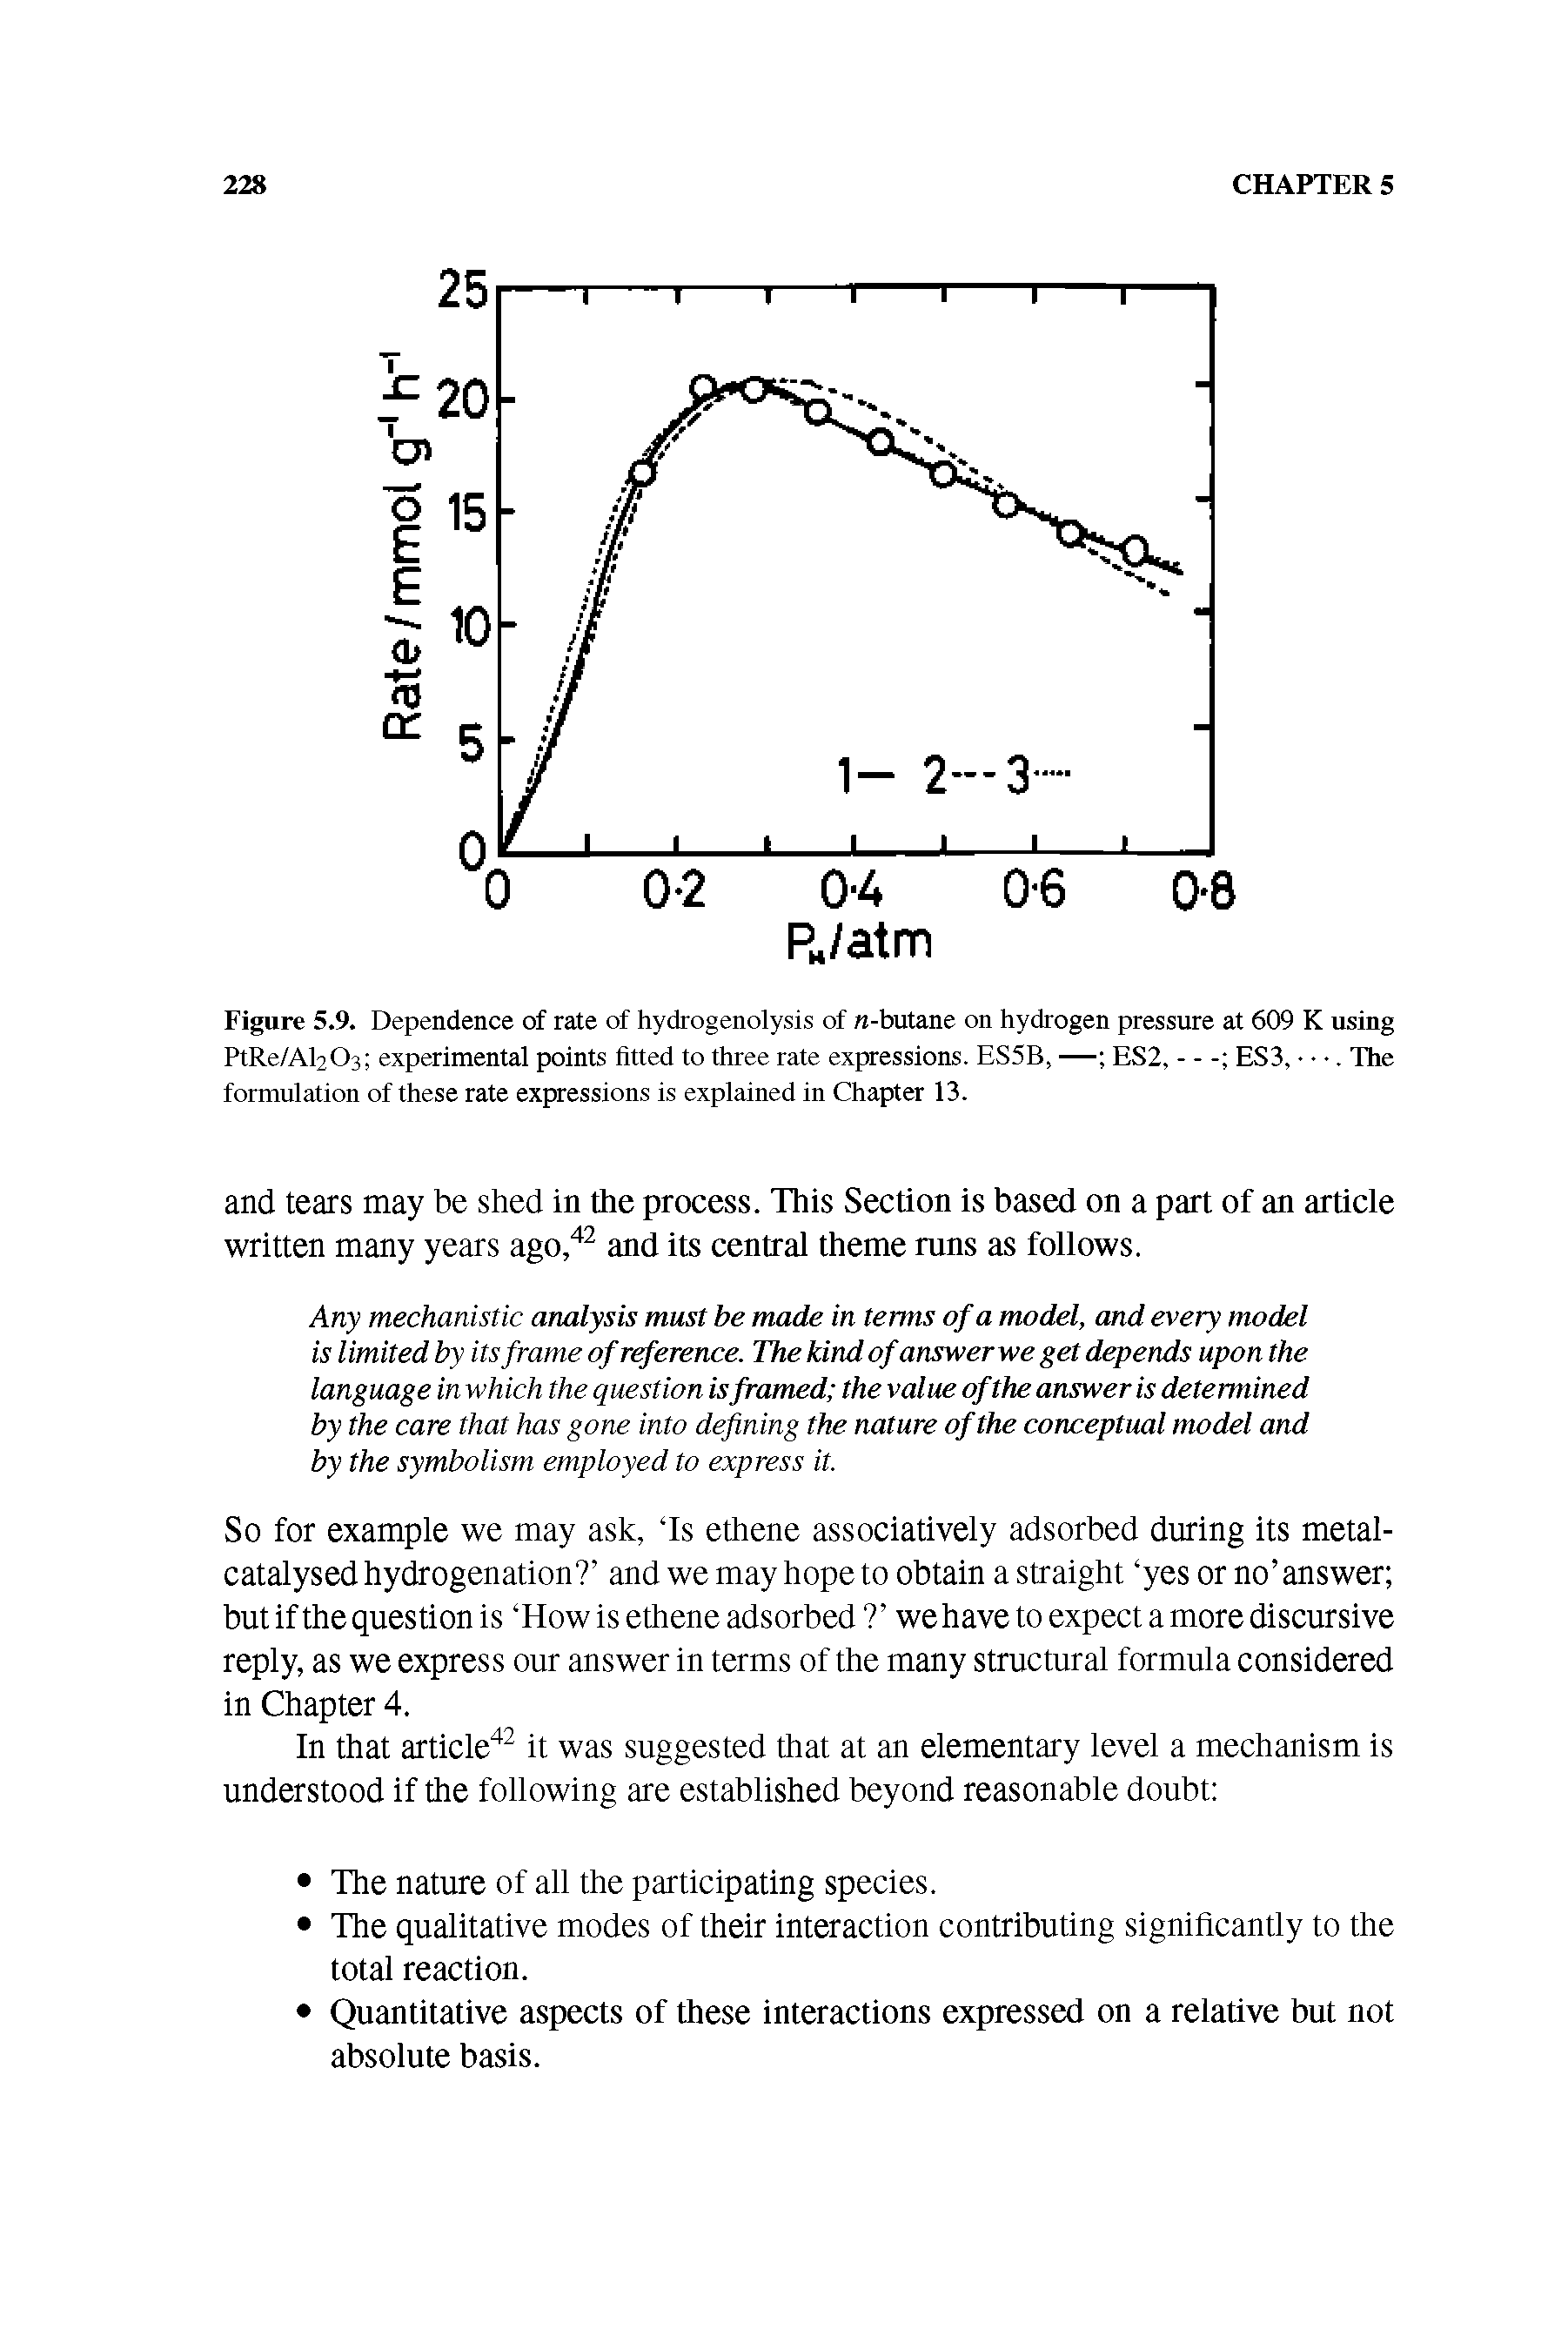 Figure 5.9. Dependence of rate of hydrogenolysis of n-butane on hydrogen pressure at 609 K using PtRe/Al203 experimental points fitted to three rate expressions. ES5B, — ES2, - - ES3, . The formulation of these rate expressions is explained in Chapter 13.